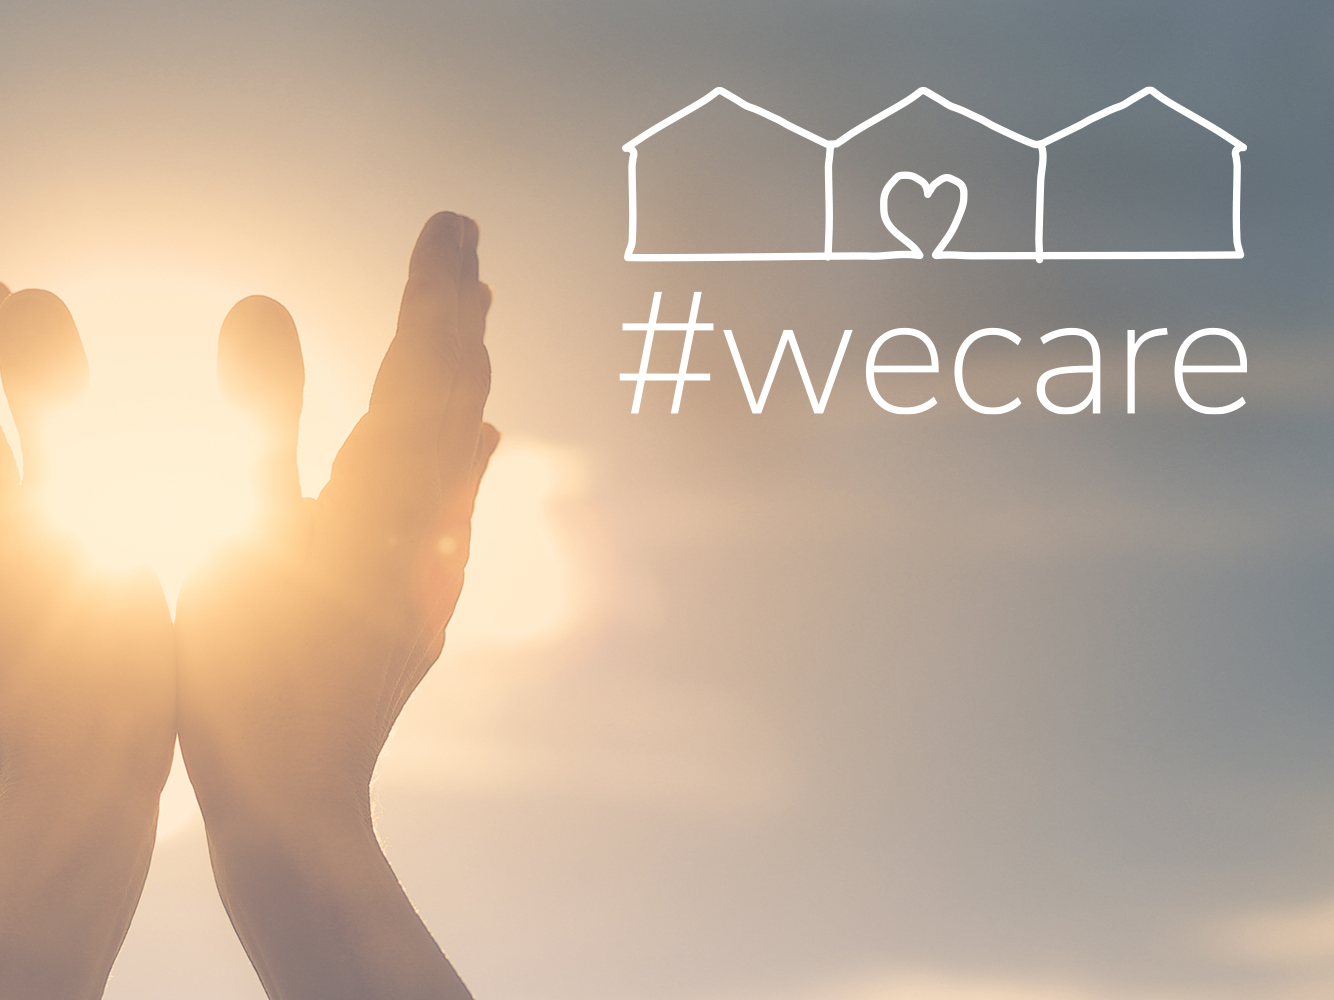 #wecare, and we want you to know it